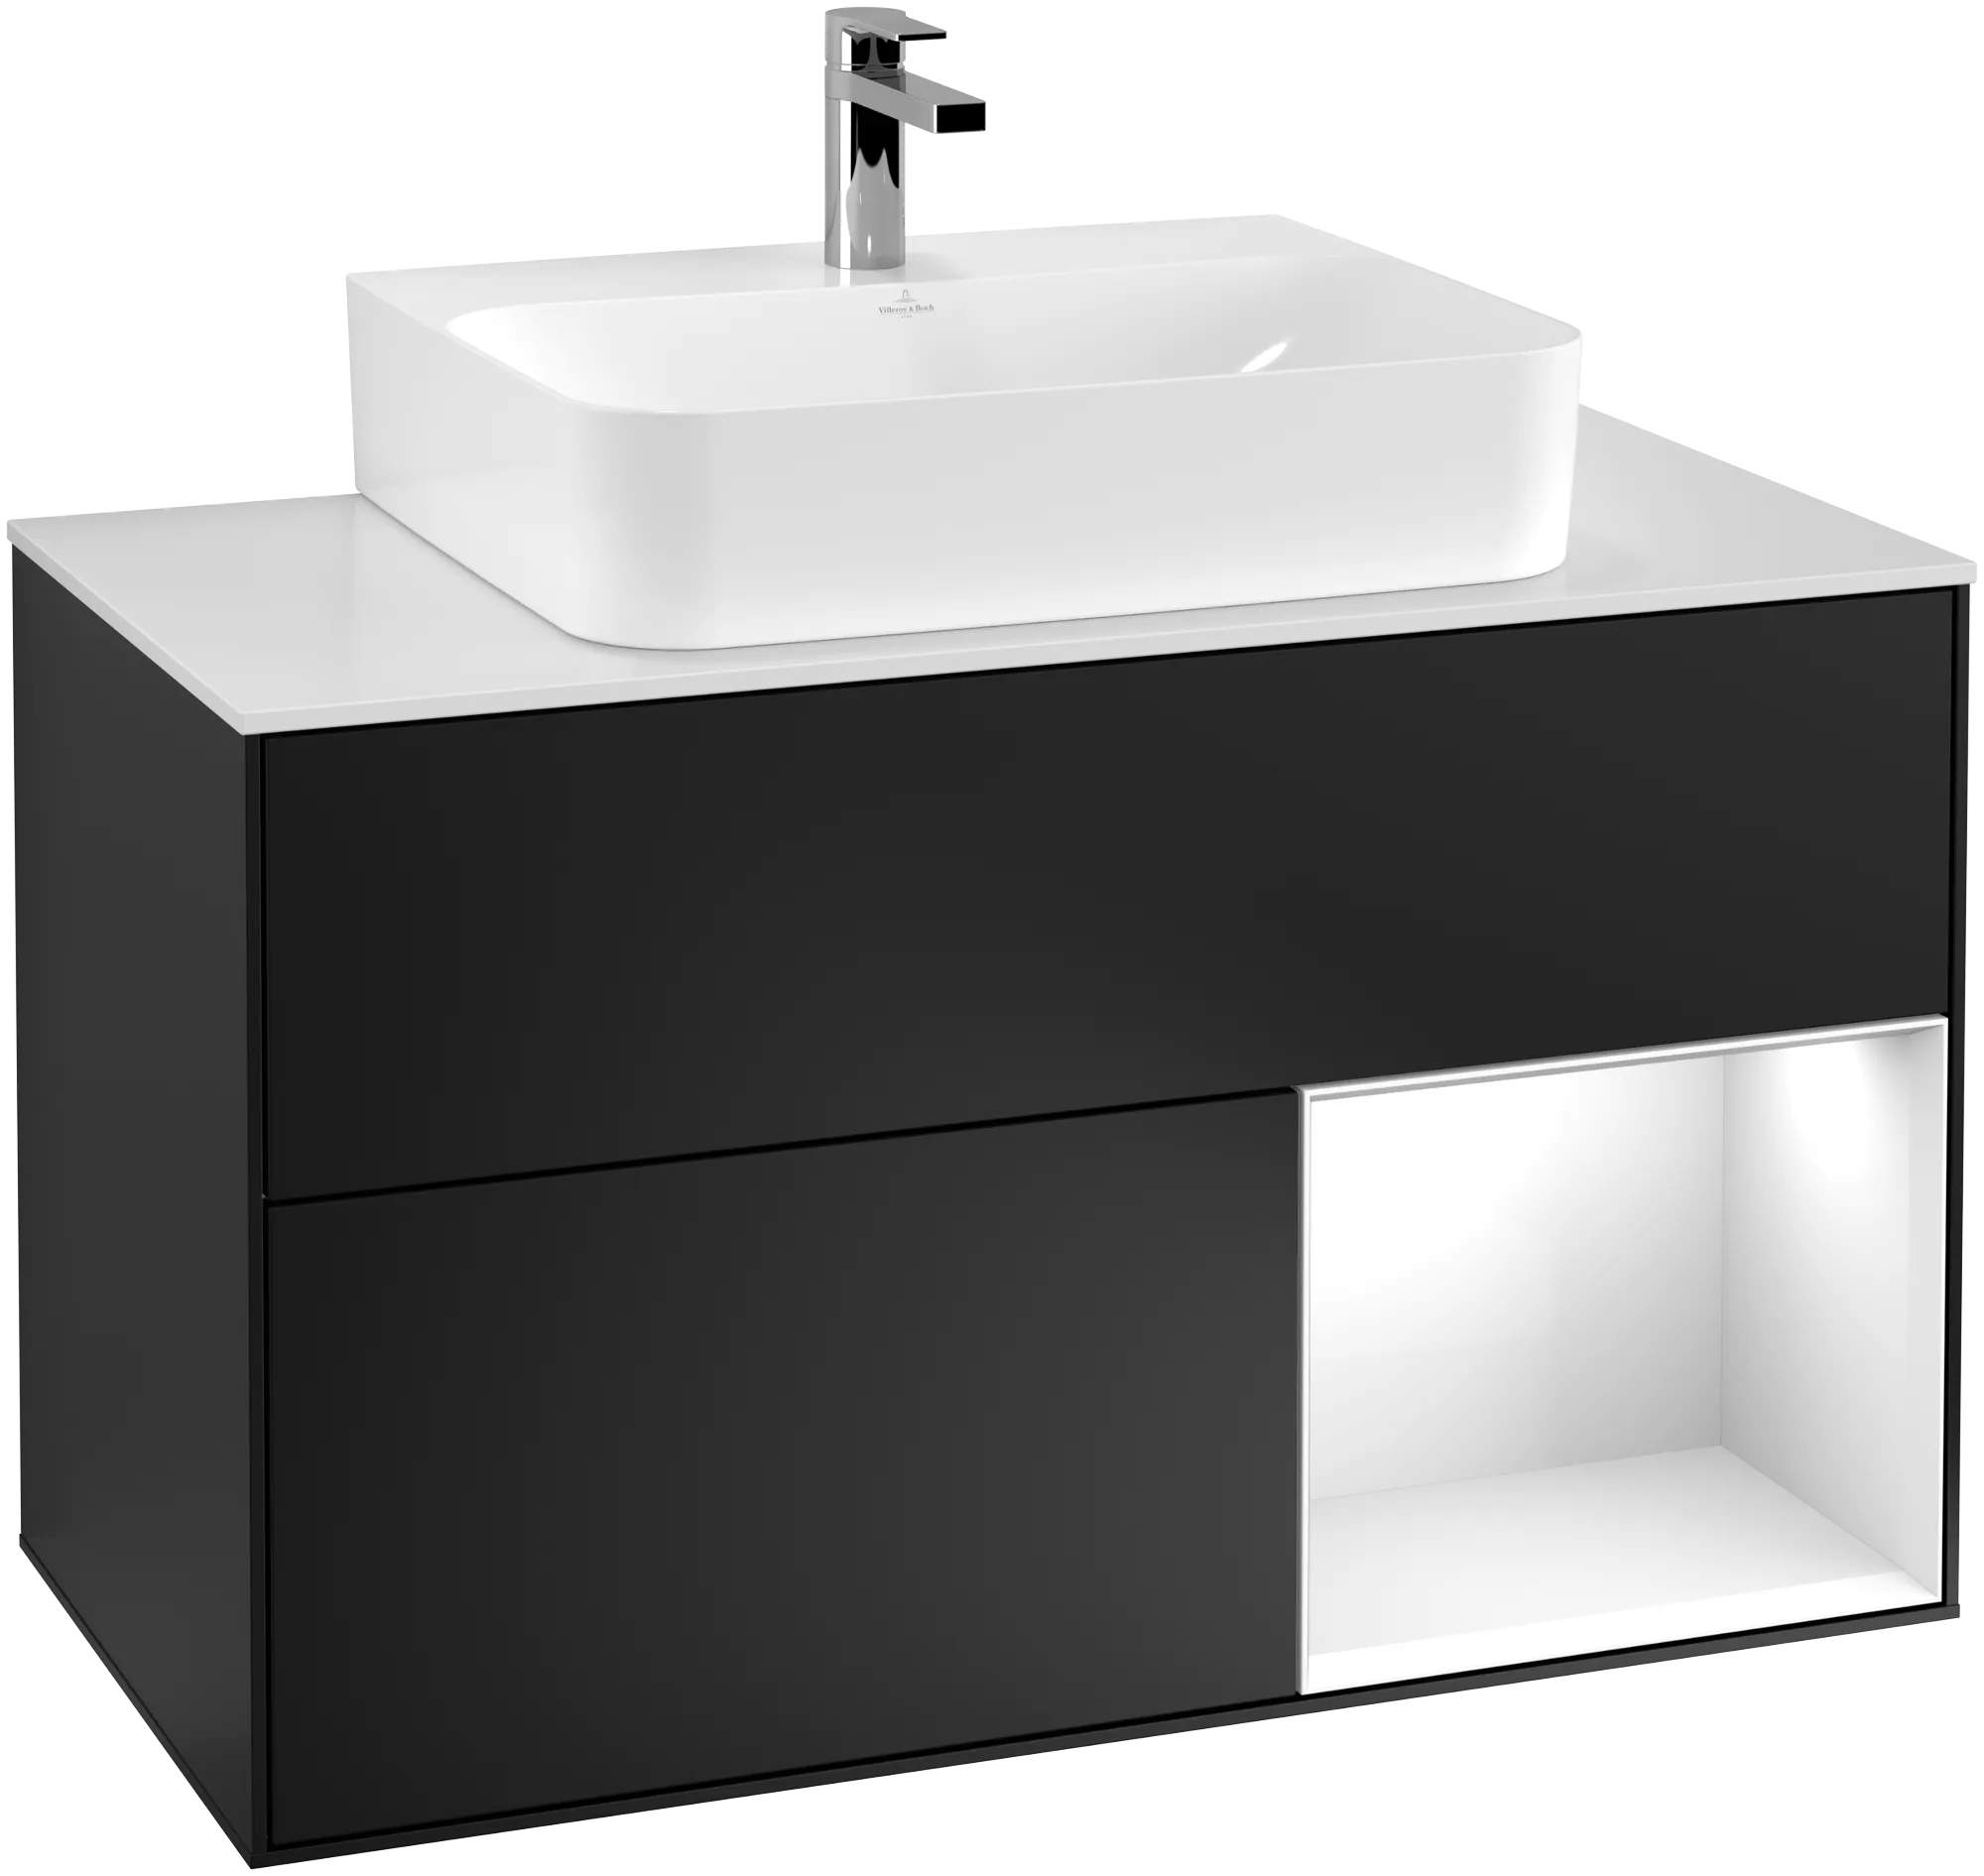 Picture of VILLEROY BOCH Finion Vanity unit, with lighting, 2 pull-out compartments, 1000 x 603 x 501 mm, Black Matt Lacquer / Glossy White Lacquer / Glass White Matt #G121GFPD